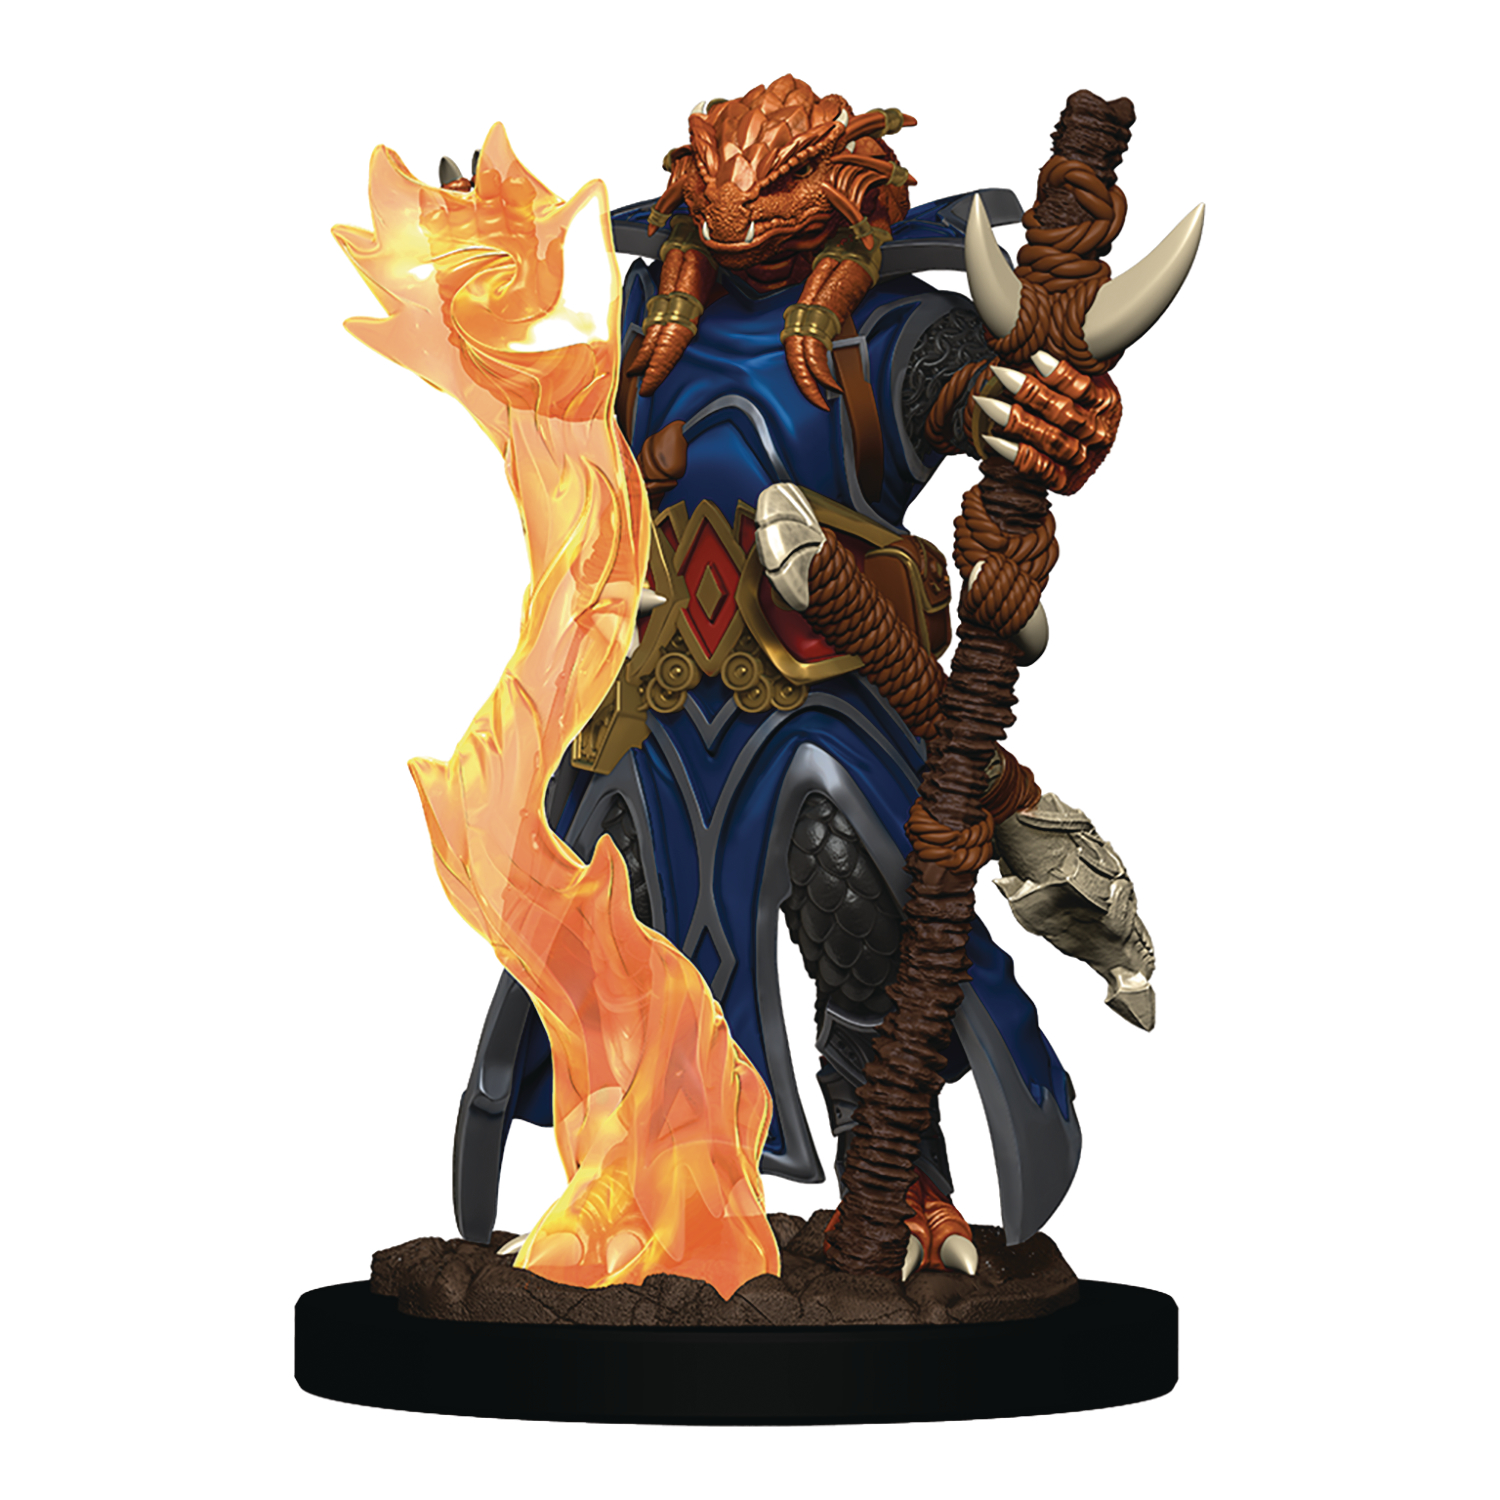 Dungeons & Dragons Icons Realm Premium Painted Figure Dragonborn Sorcerer Female